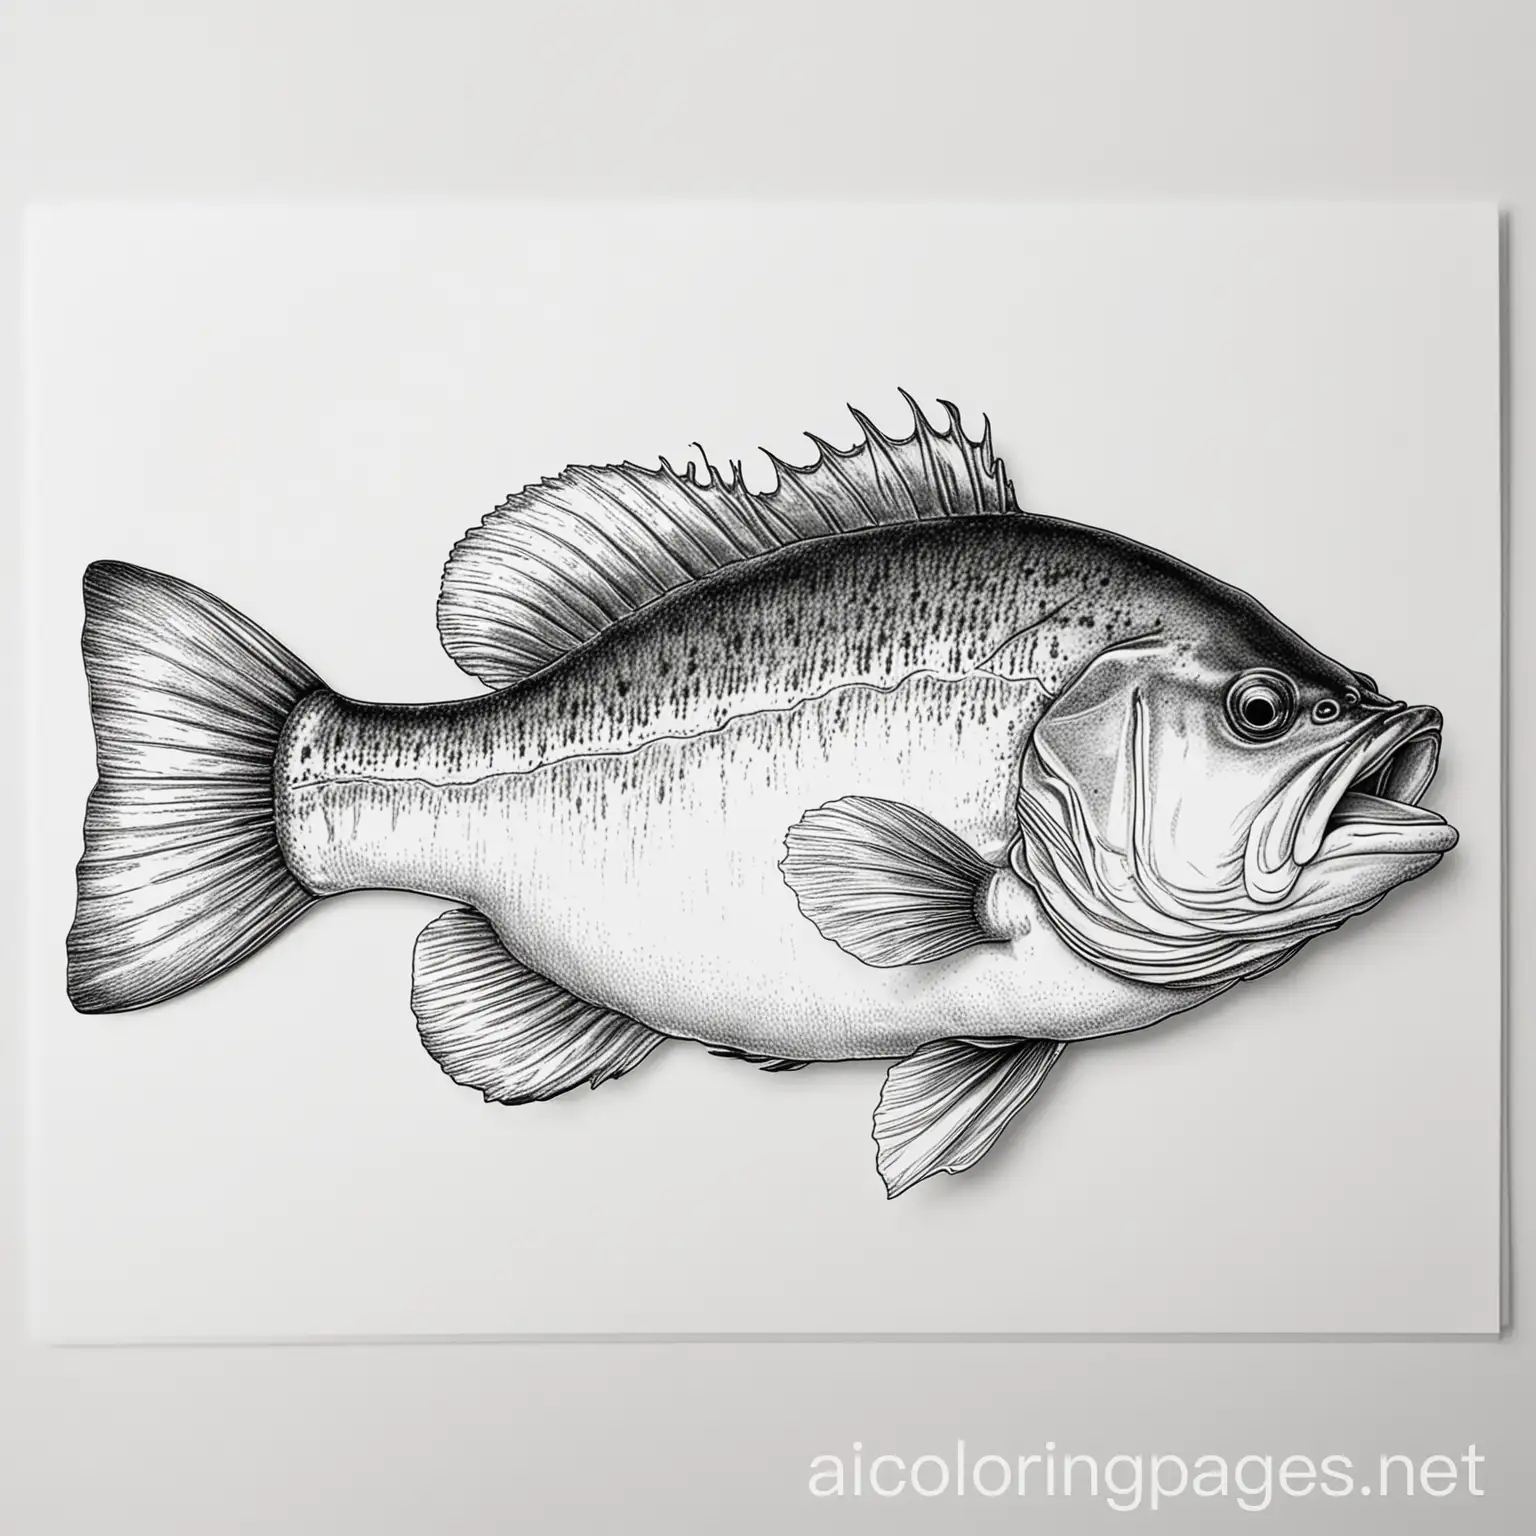 Detailed-Black-and-White-Coloring-Page-of-Smallmouth-Bass